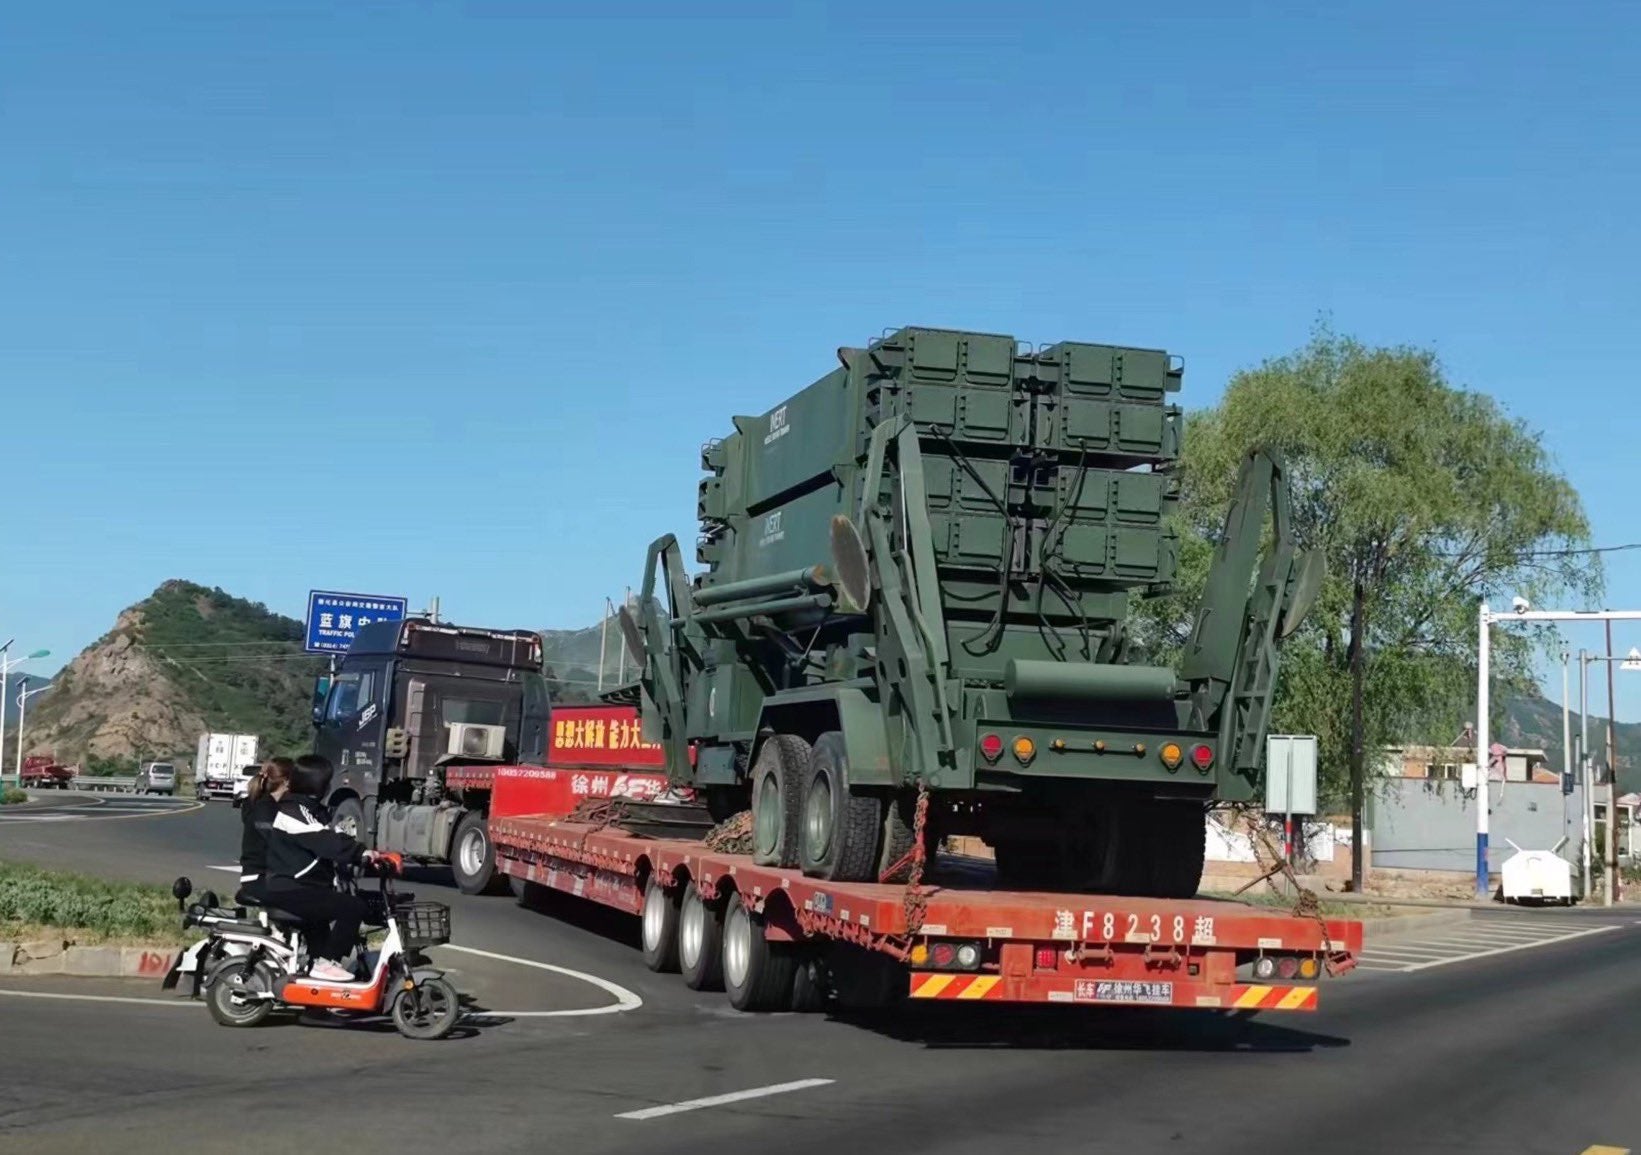 This image likely shows a Patriot system mock-up, one expert tells us. Via Twitter